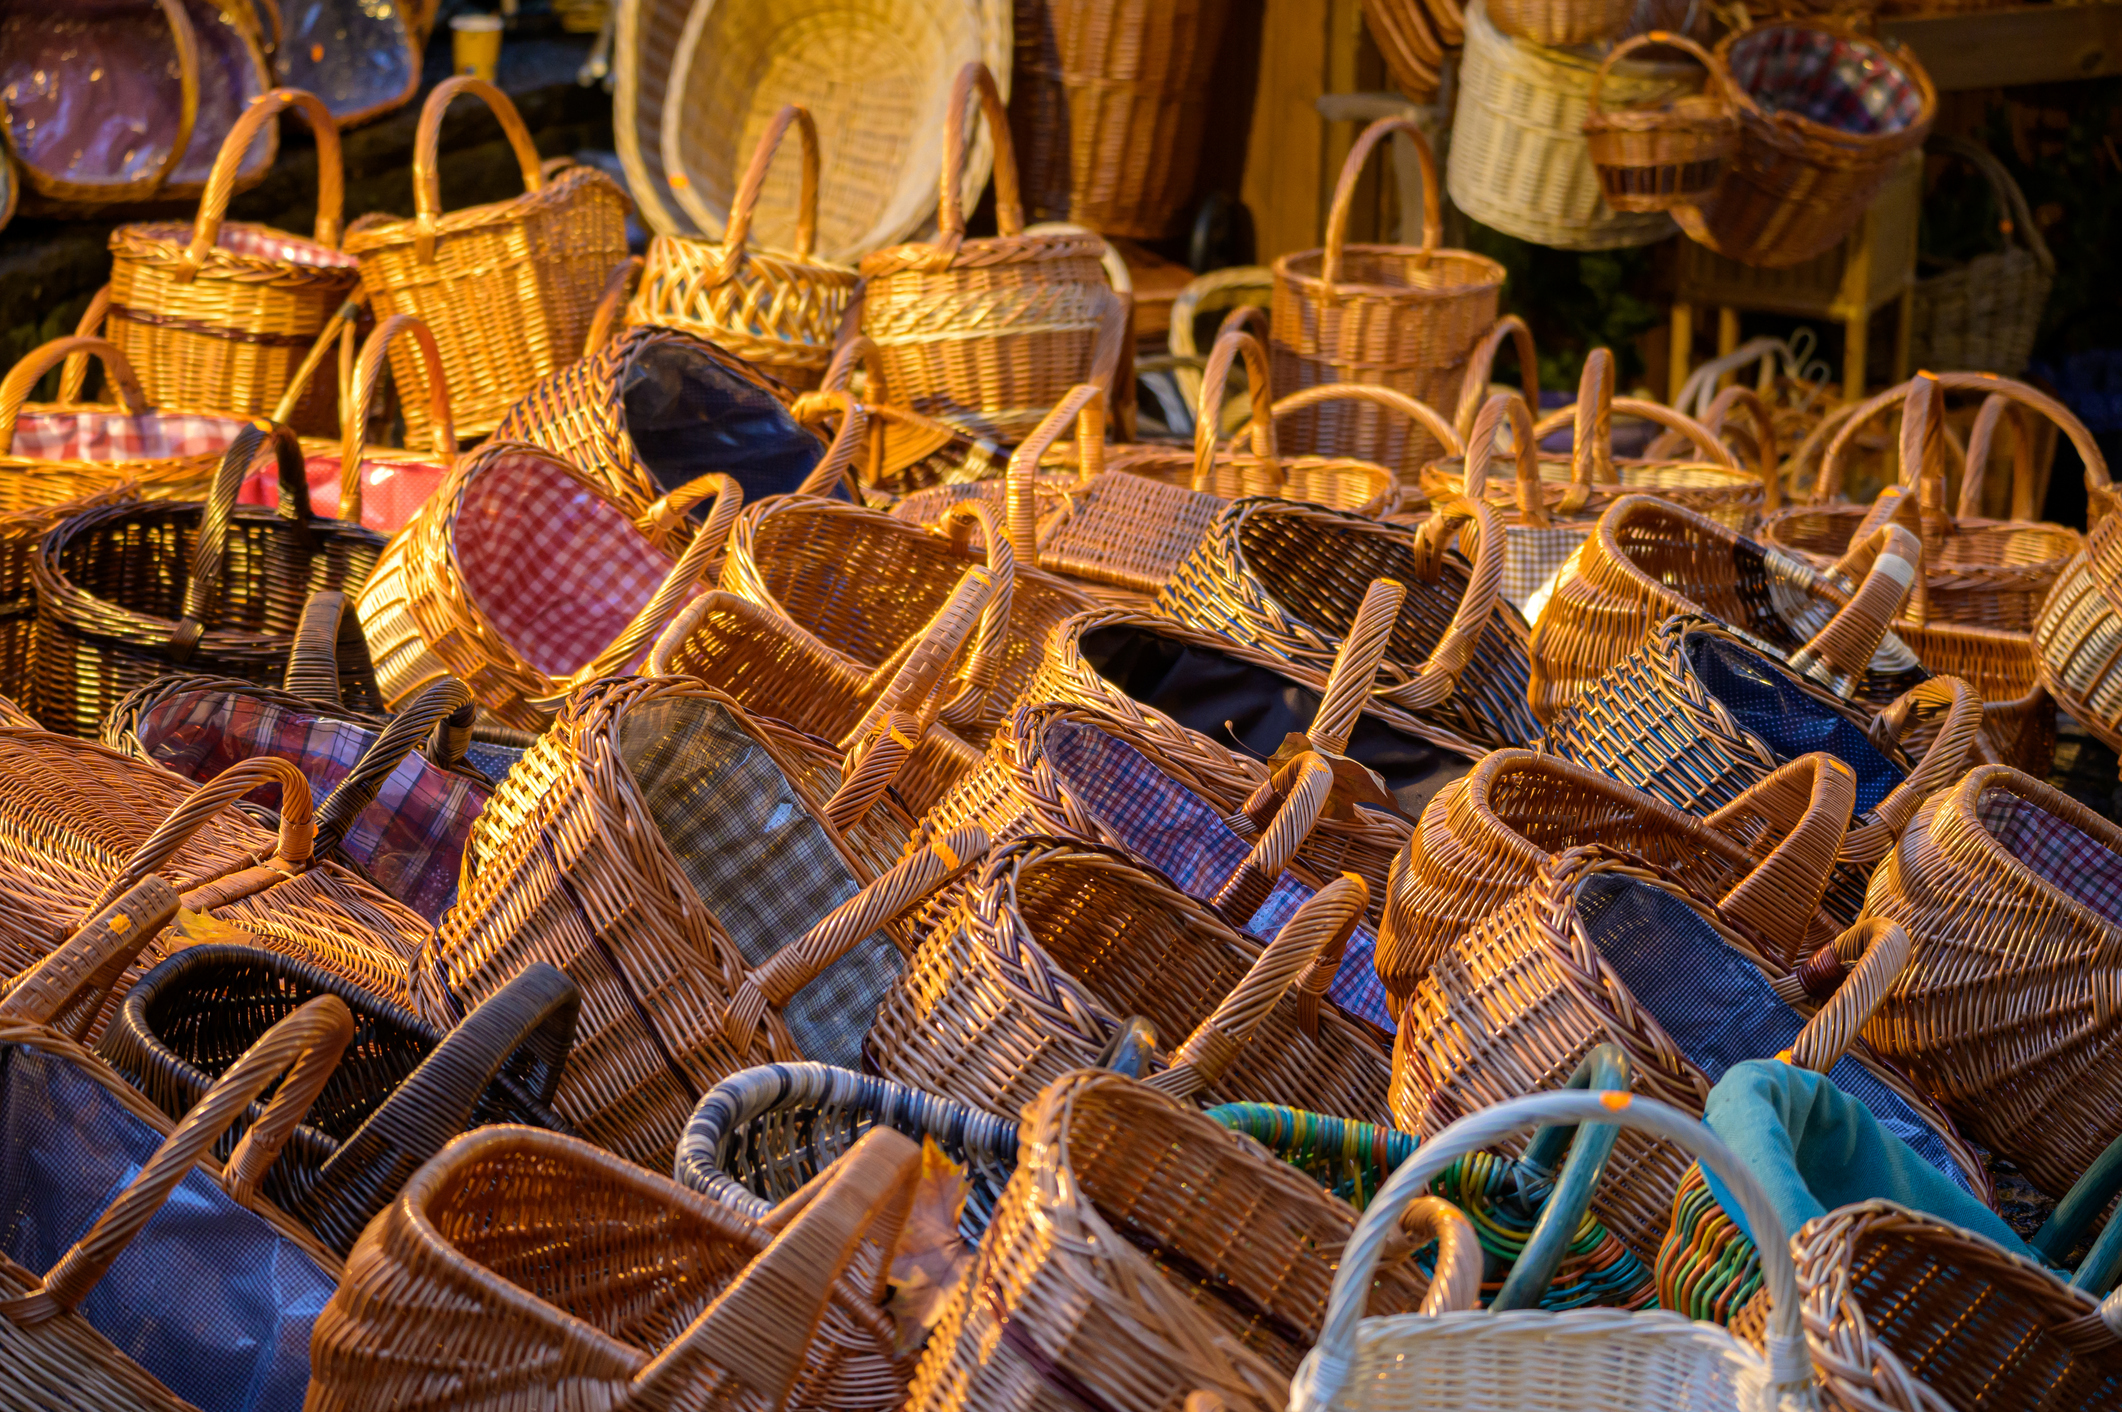 Hundreds of wicker baskets outside a stall on a Christmas market. (Photo: iStock - Andre Engelhardt)